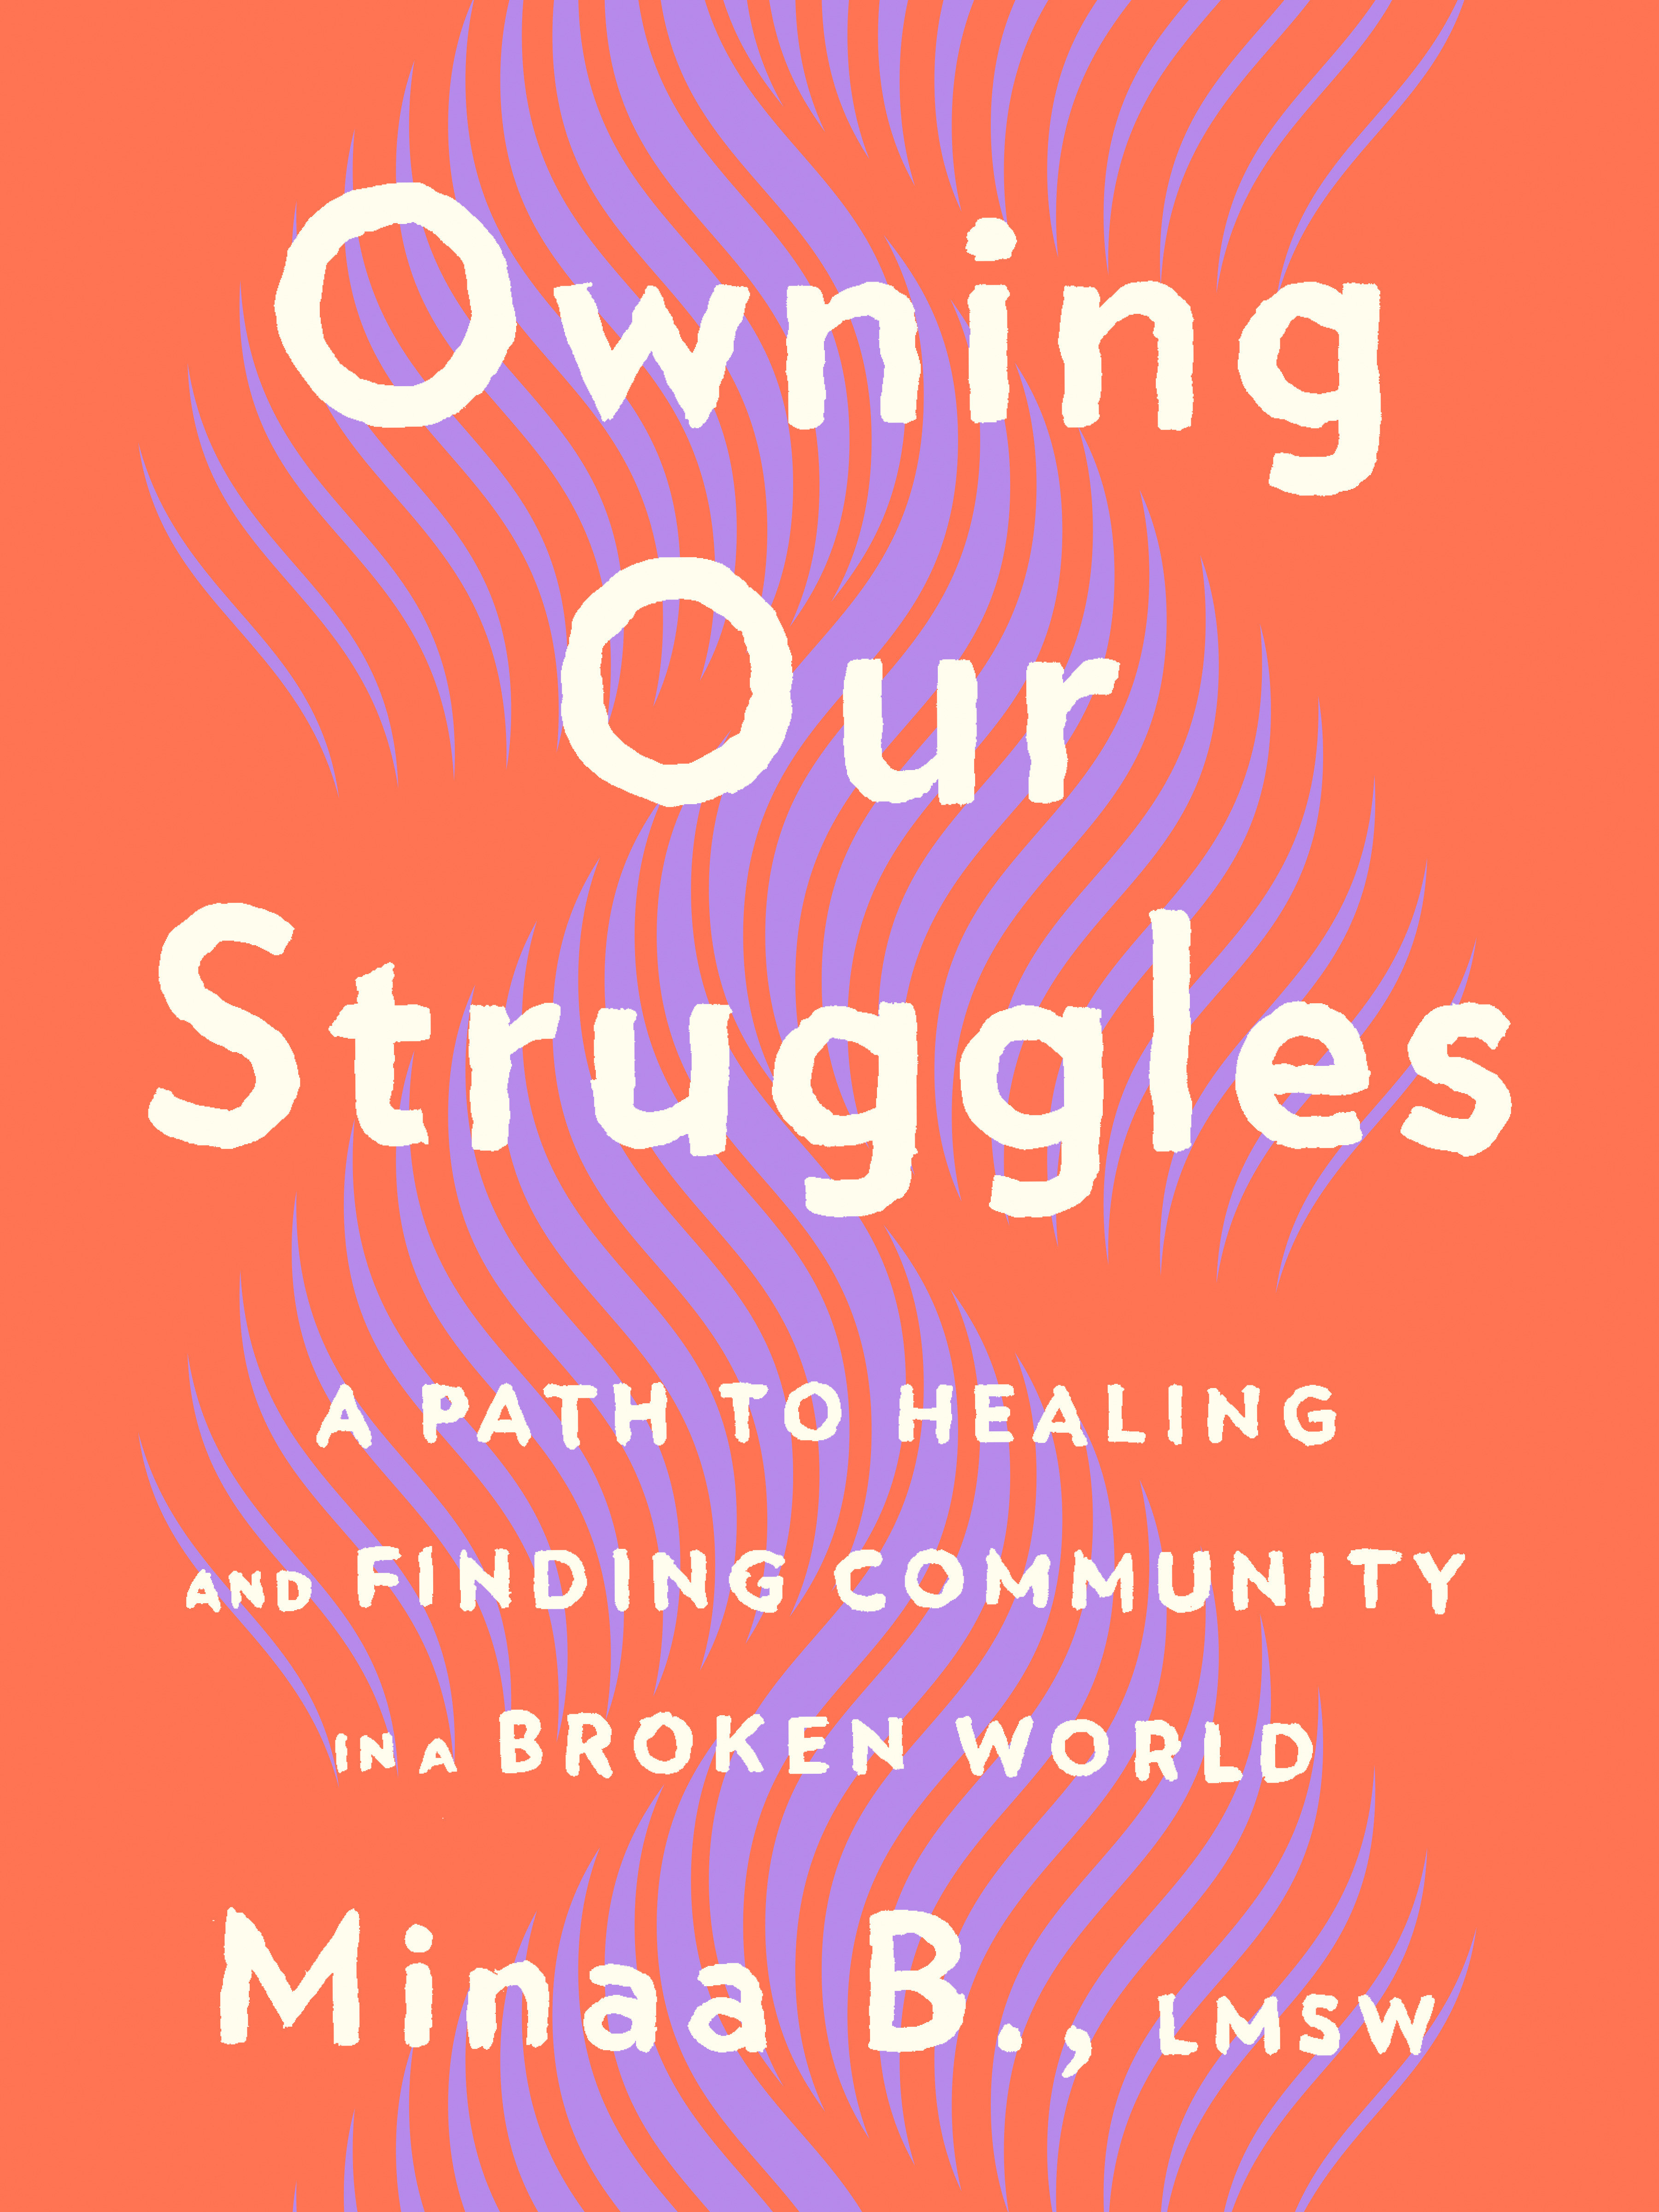 Owning Our Struggles (Hardcover Book)